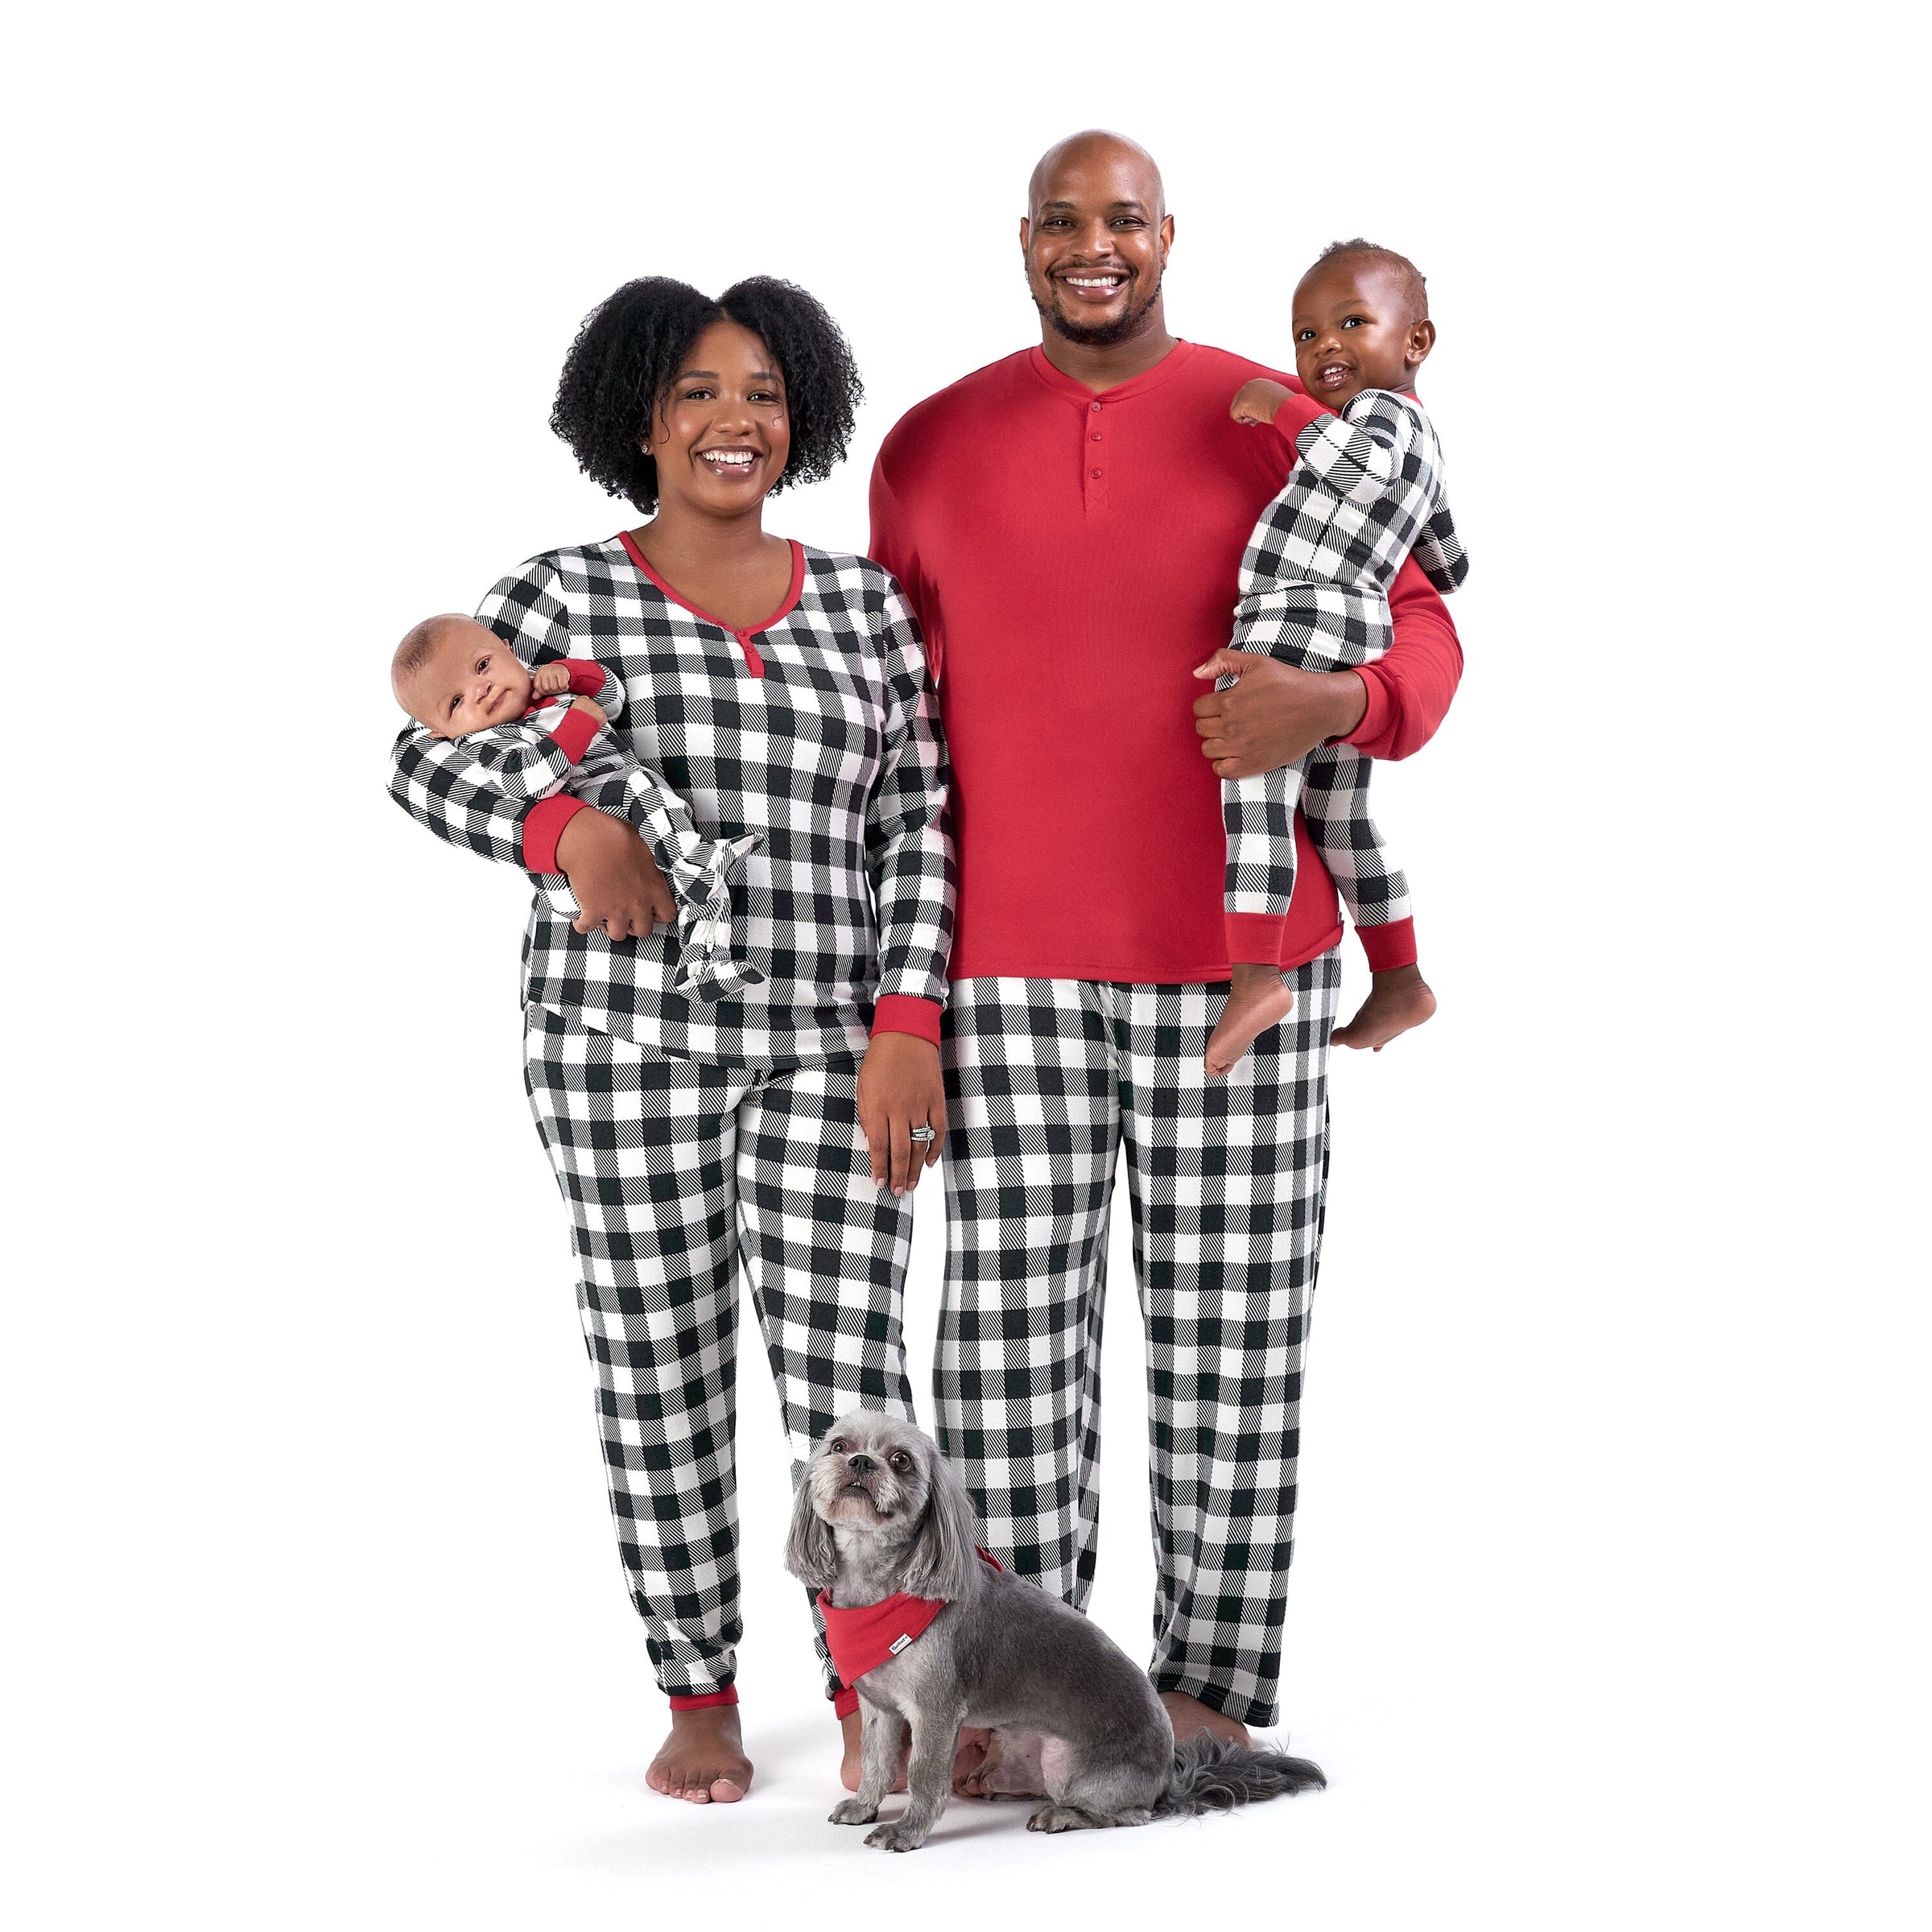 The image depicts a family wearing red and black plaid pajamas along with their pet dog.